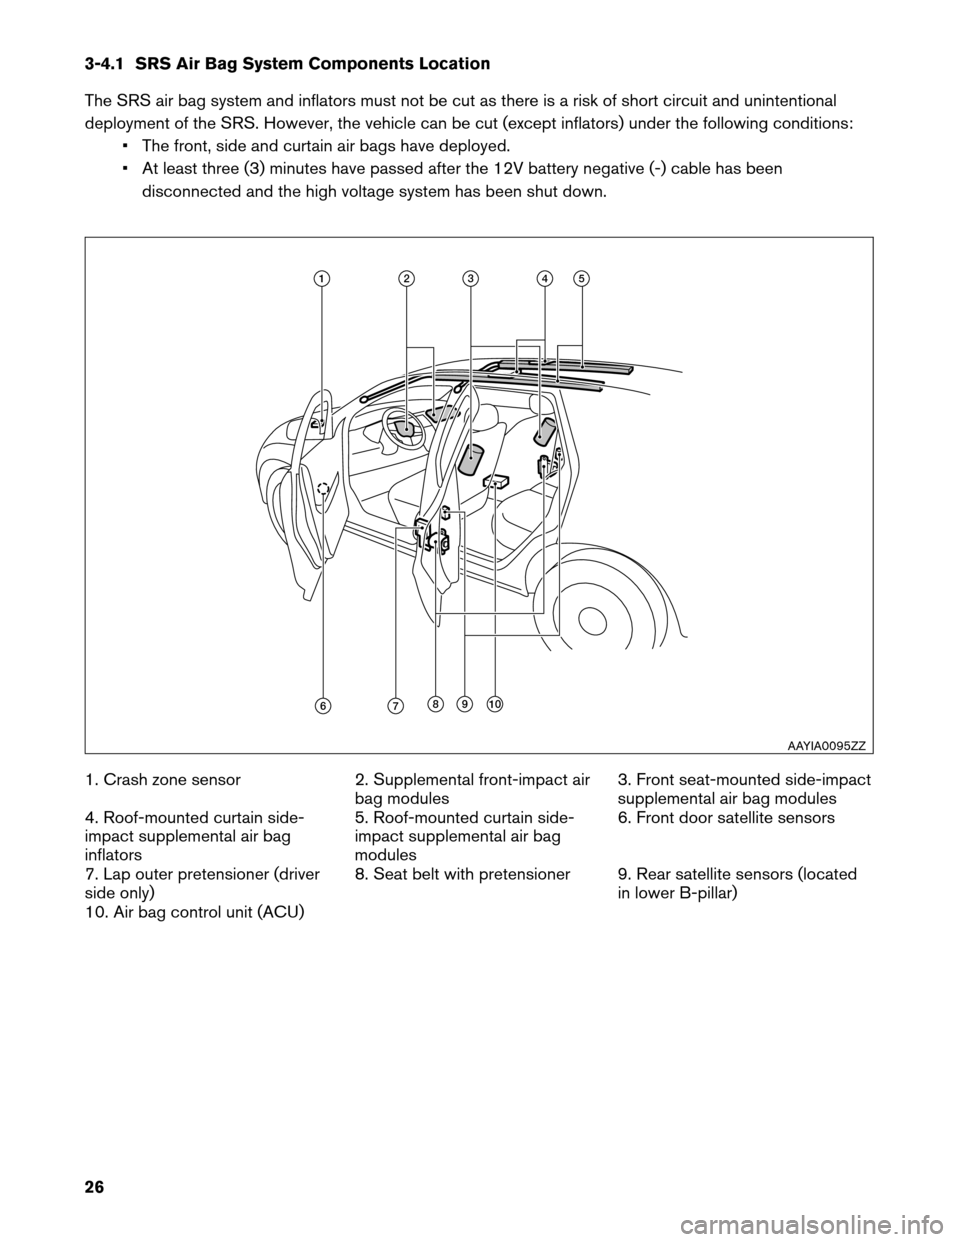 NISSAN LEAF 2013 1.G Dismantling Guide 3-4.1 SRS Air Bag System Components Location
The
SRS air bag system and inflators must not be cut as there is a risk of short circuit and unintentional
deployment of the SRS. However, the vehicle can 